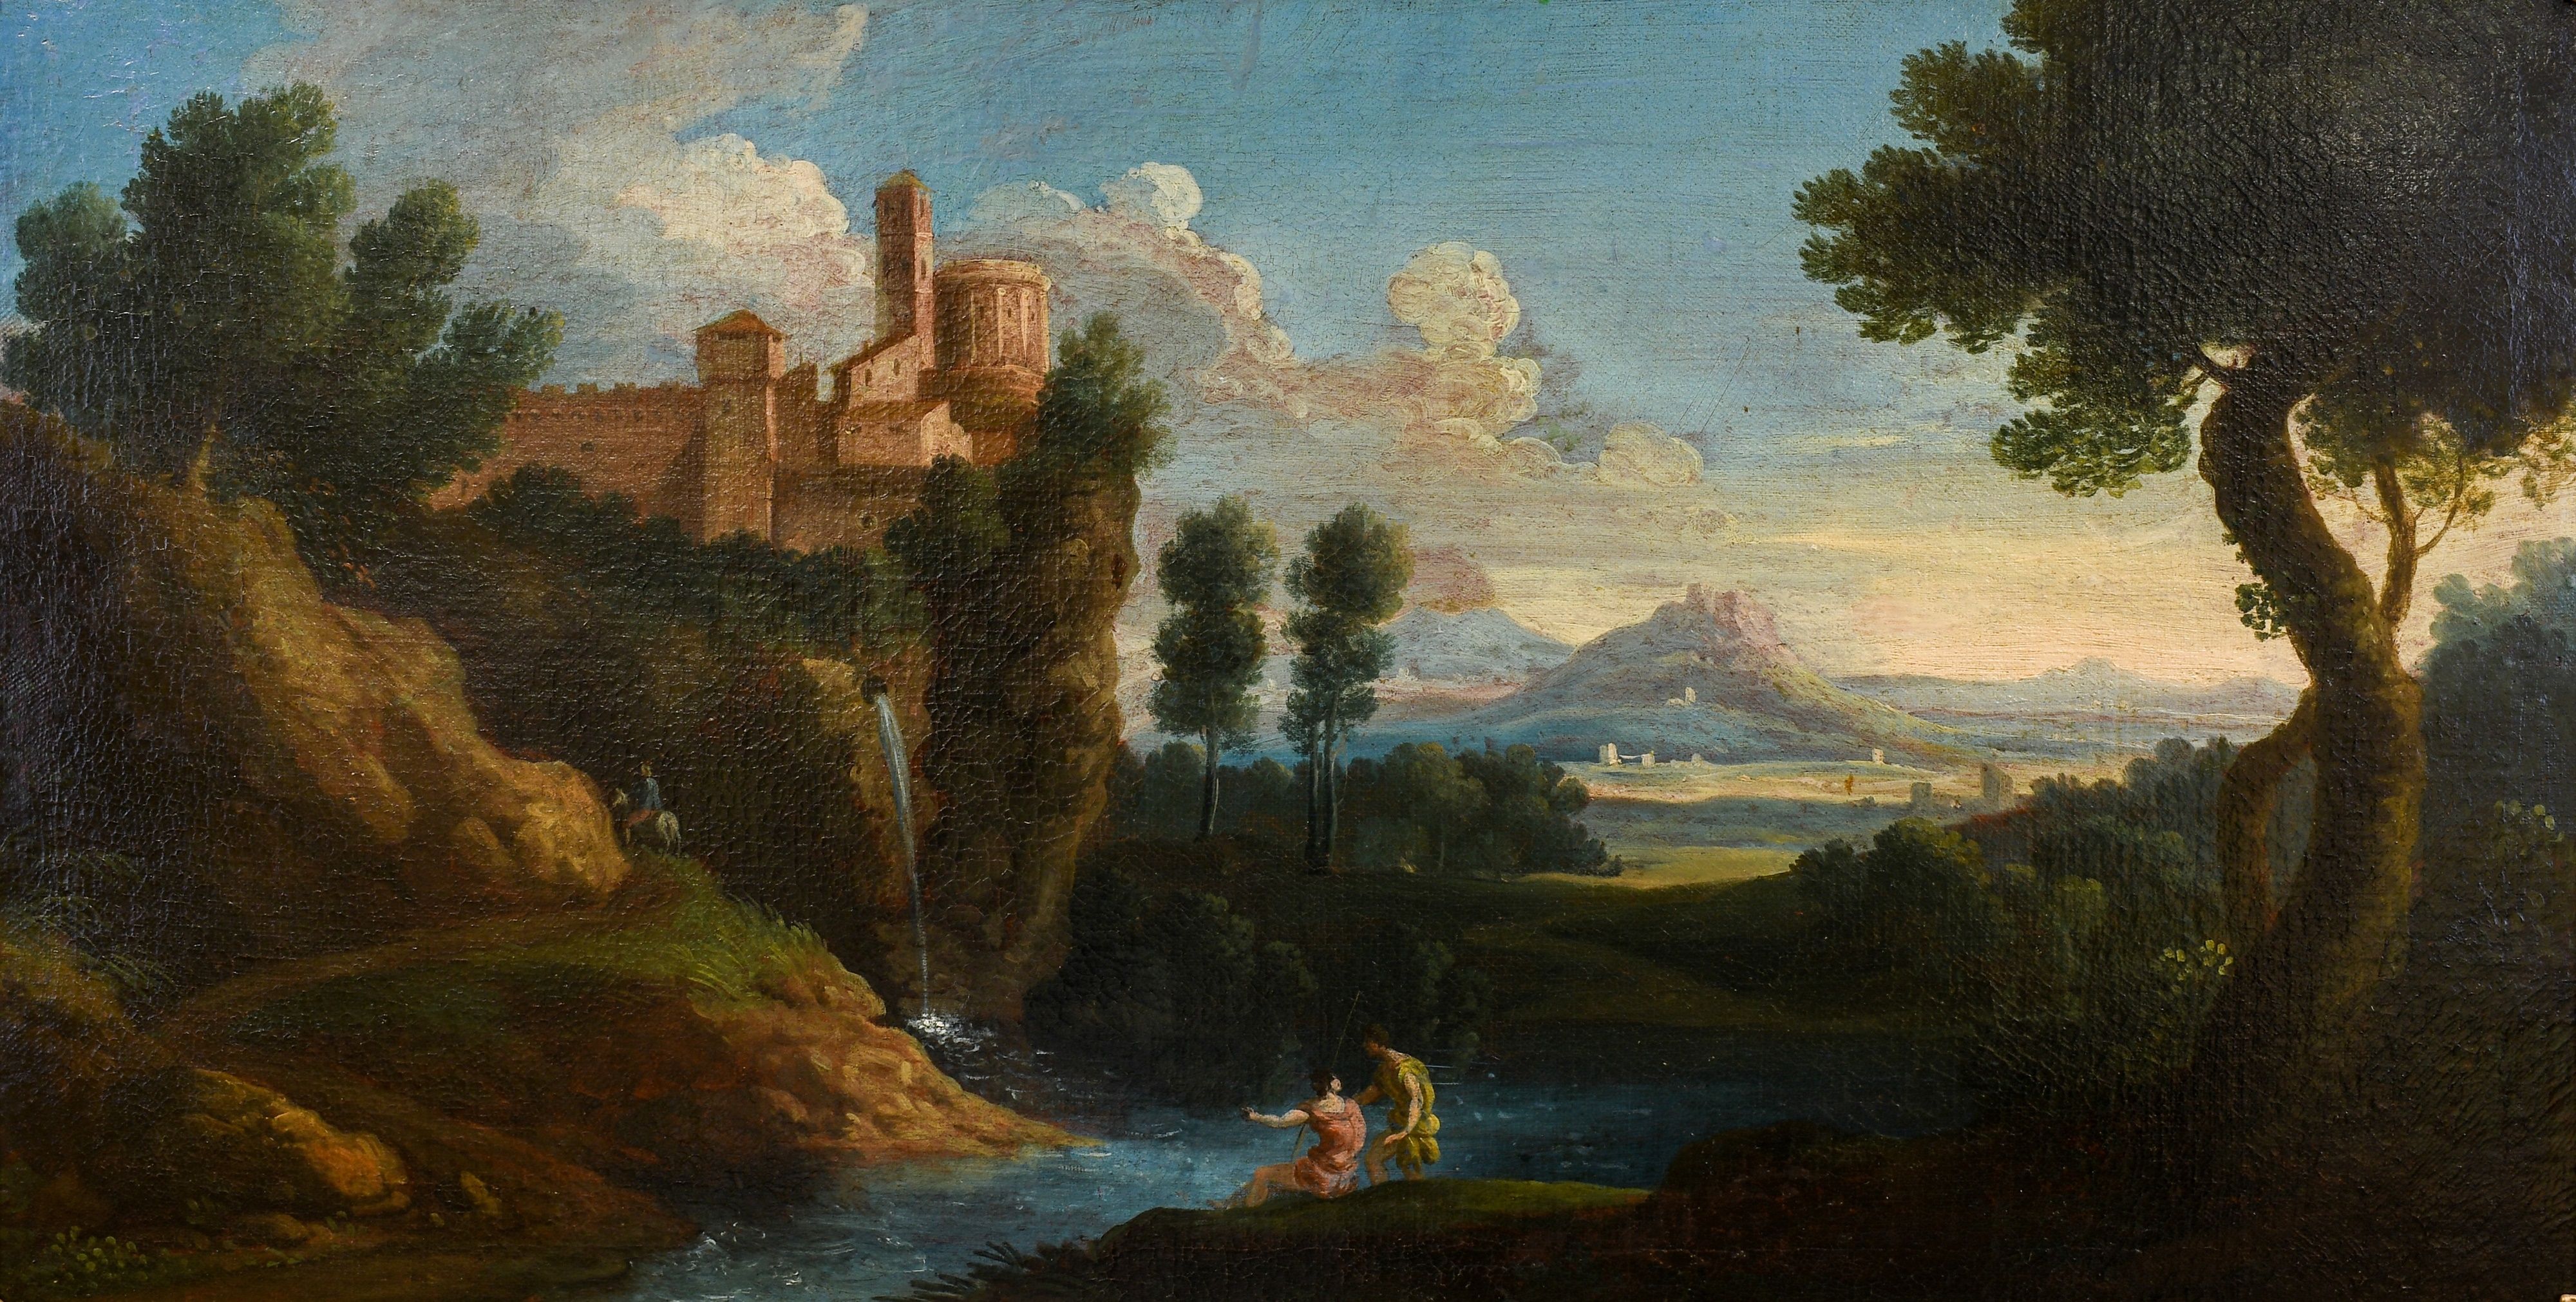 Artwork by Nicolas Poussin, Classical figures in an Italianate landscape, Made of Oil on canvas